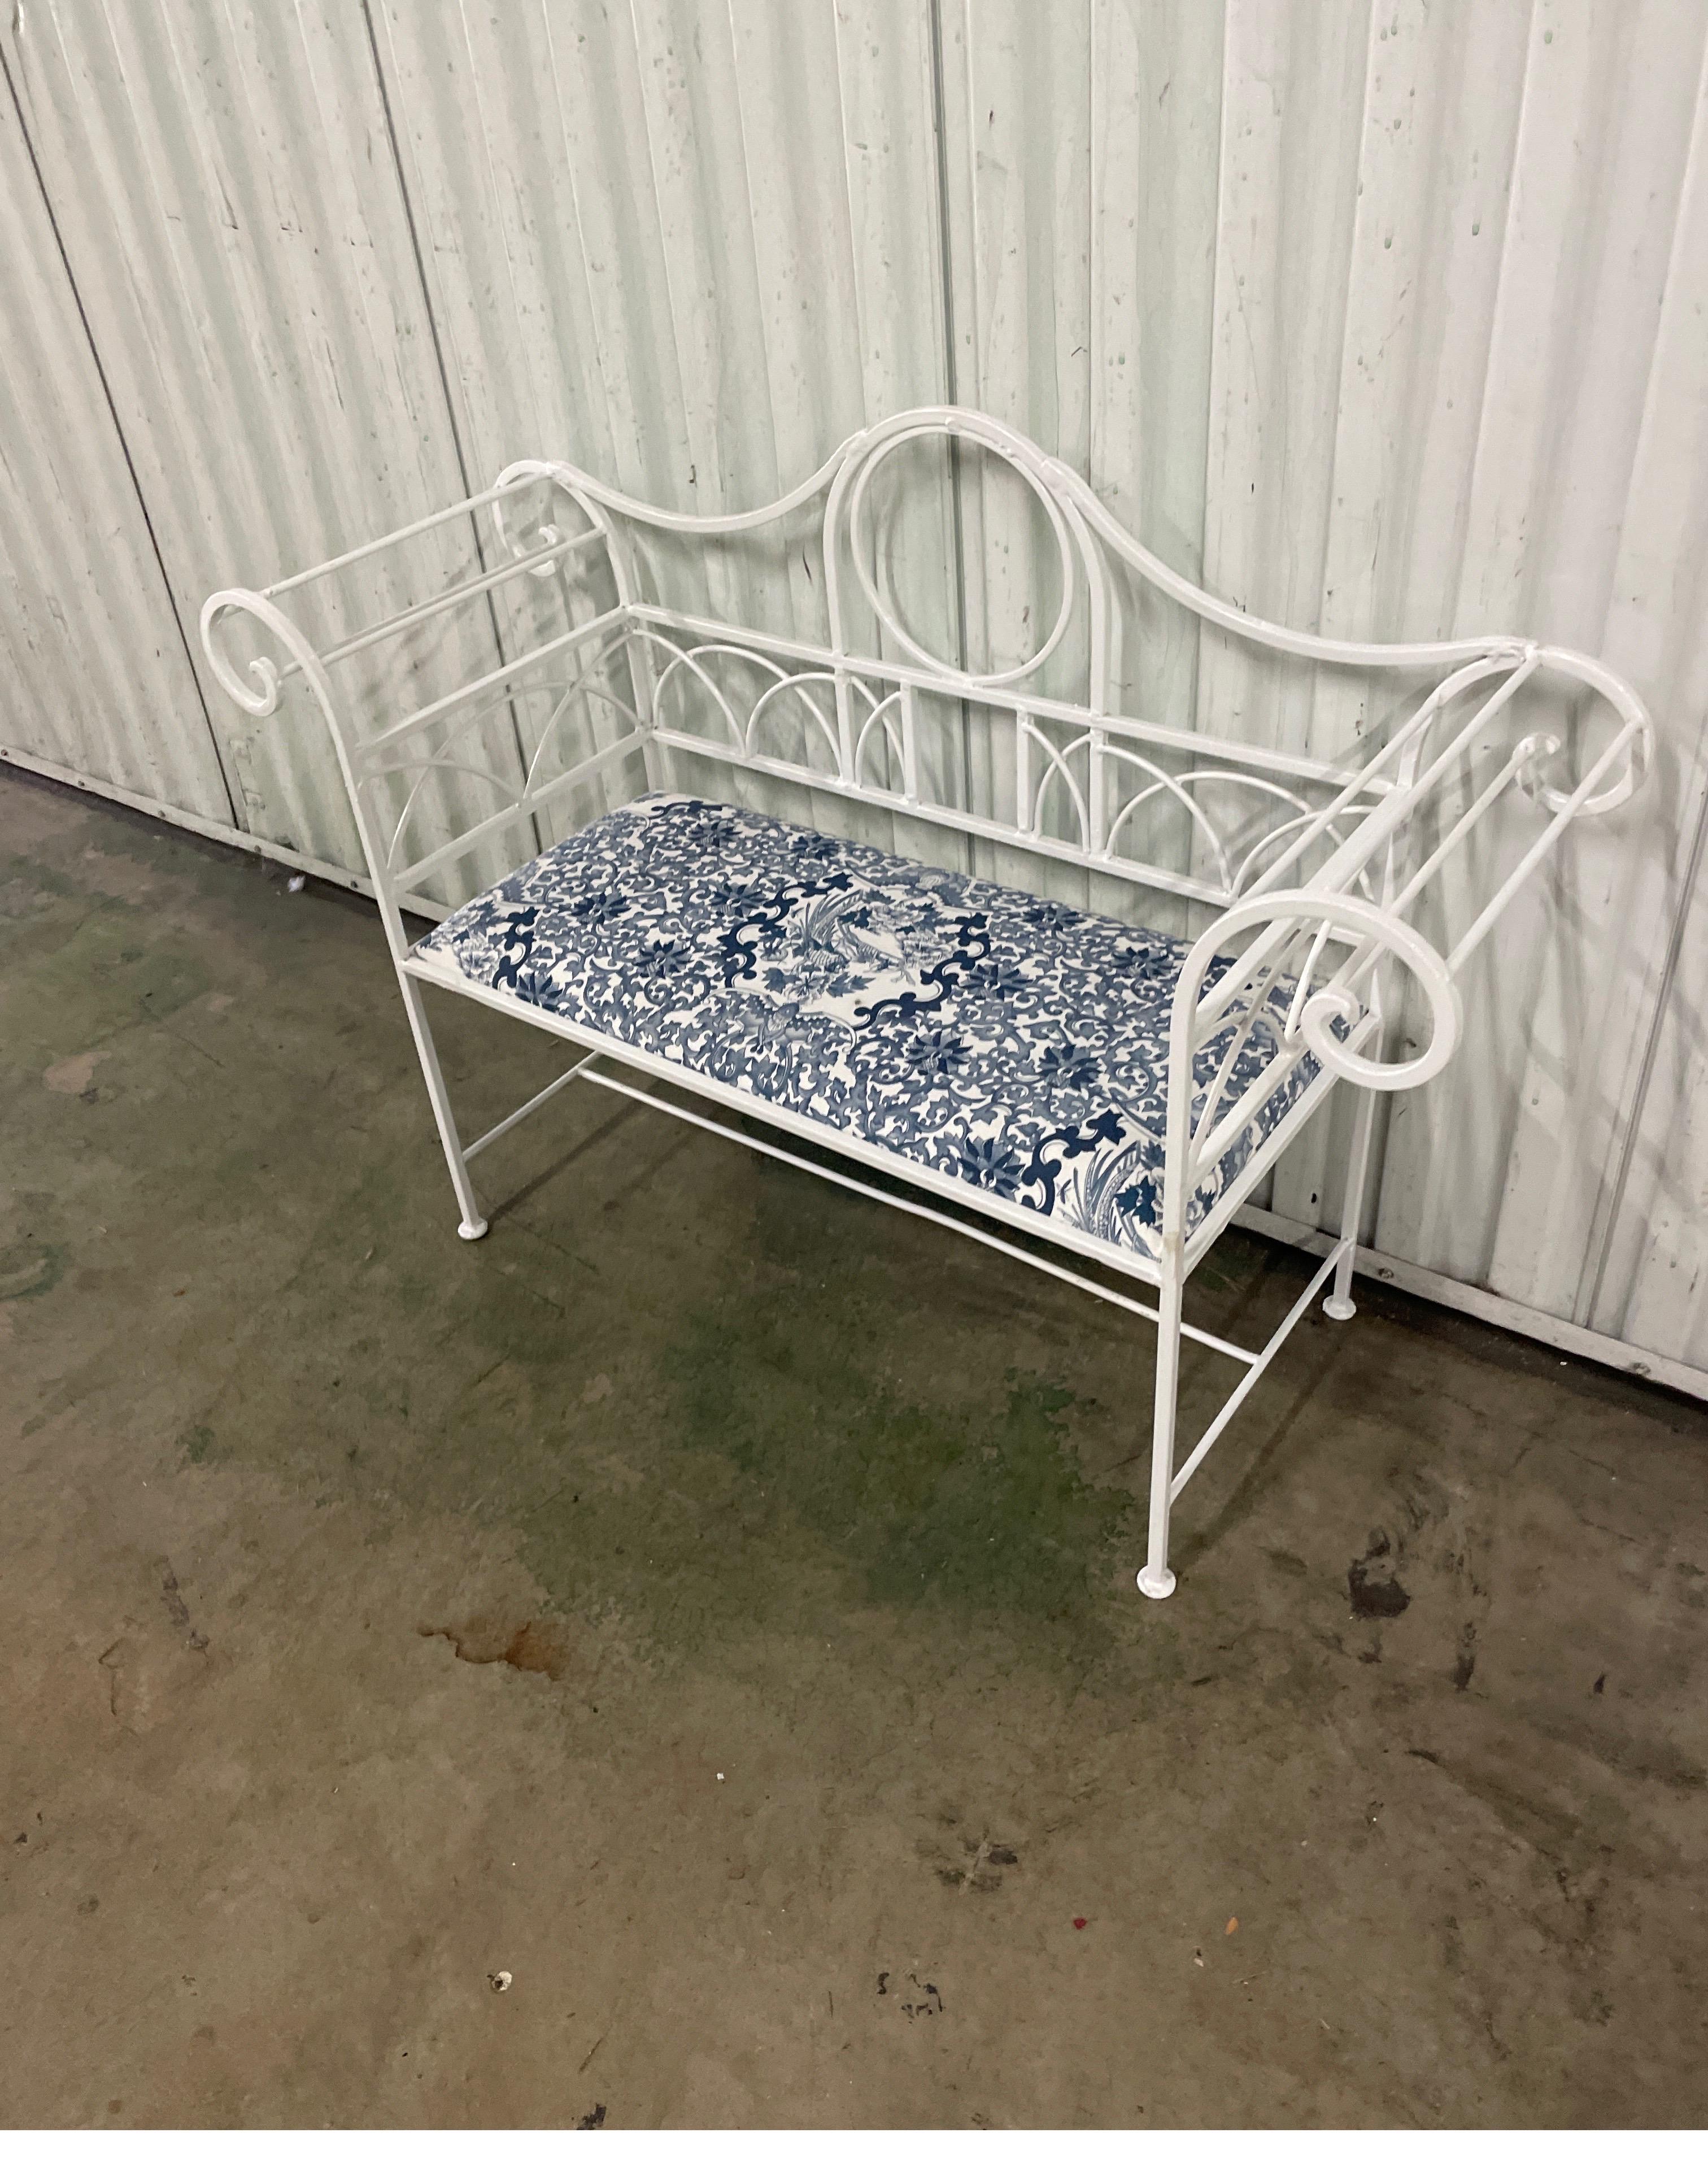 Charming Miniature Brighton Pavillion style settee. This piece is finished in gloss white with a Ralph Lauren upholstered seat cushion in a chinoiserie blue & white print. Lovely for a child or your favorite pet.